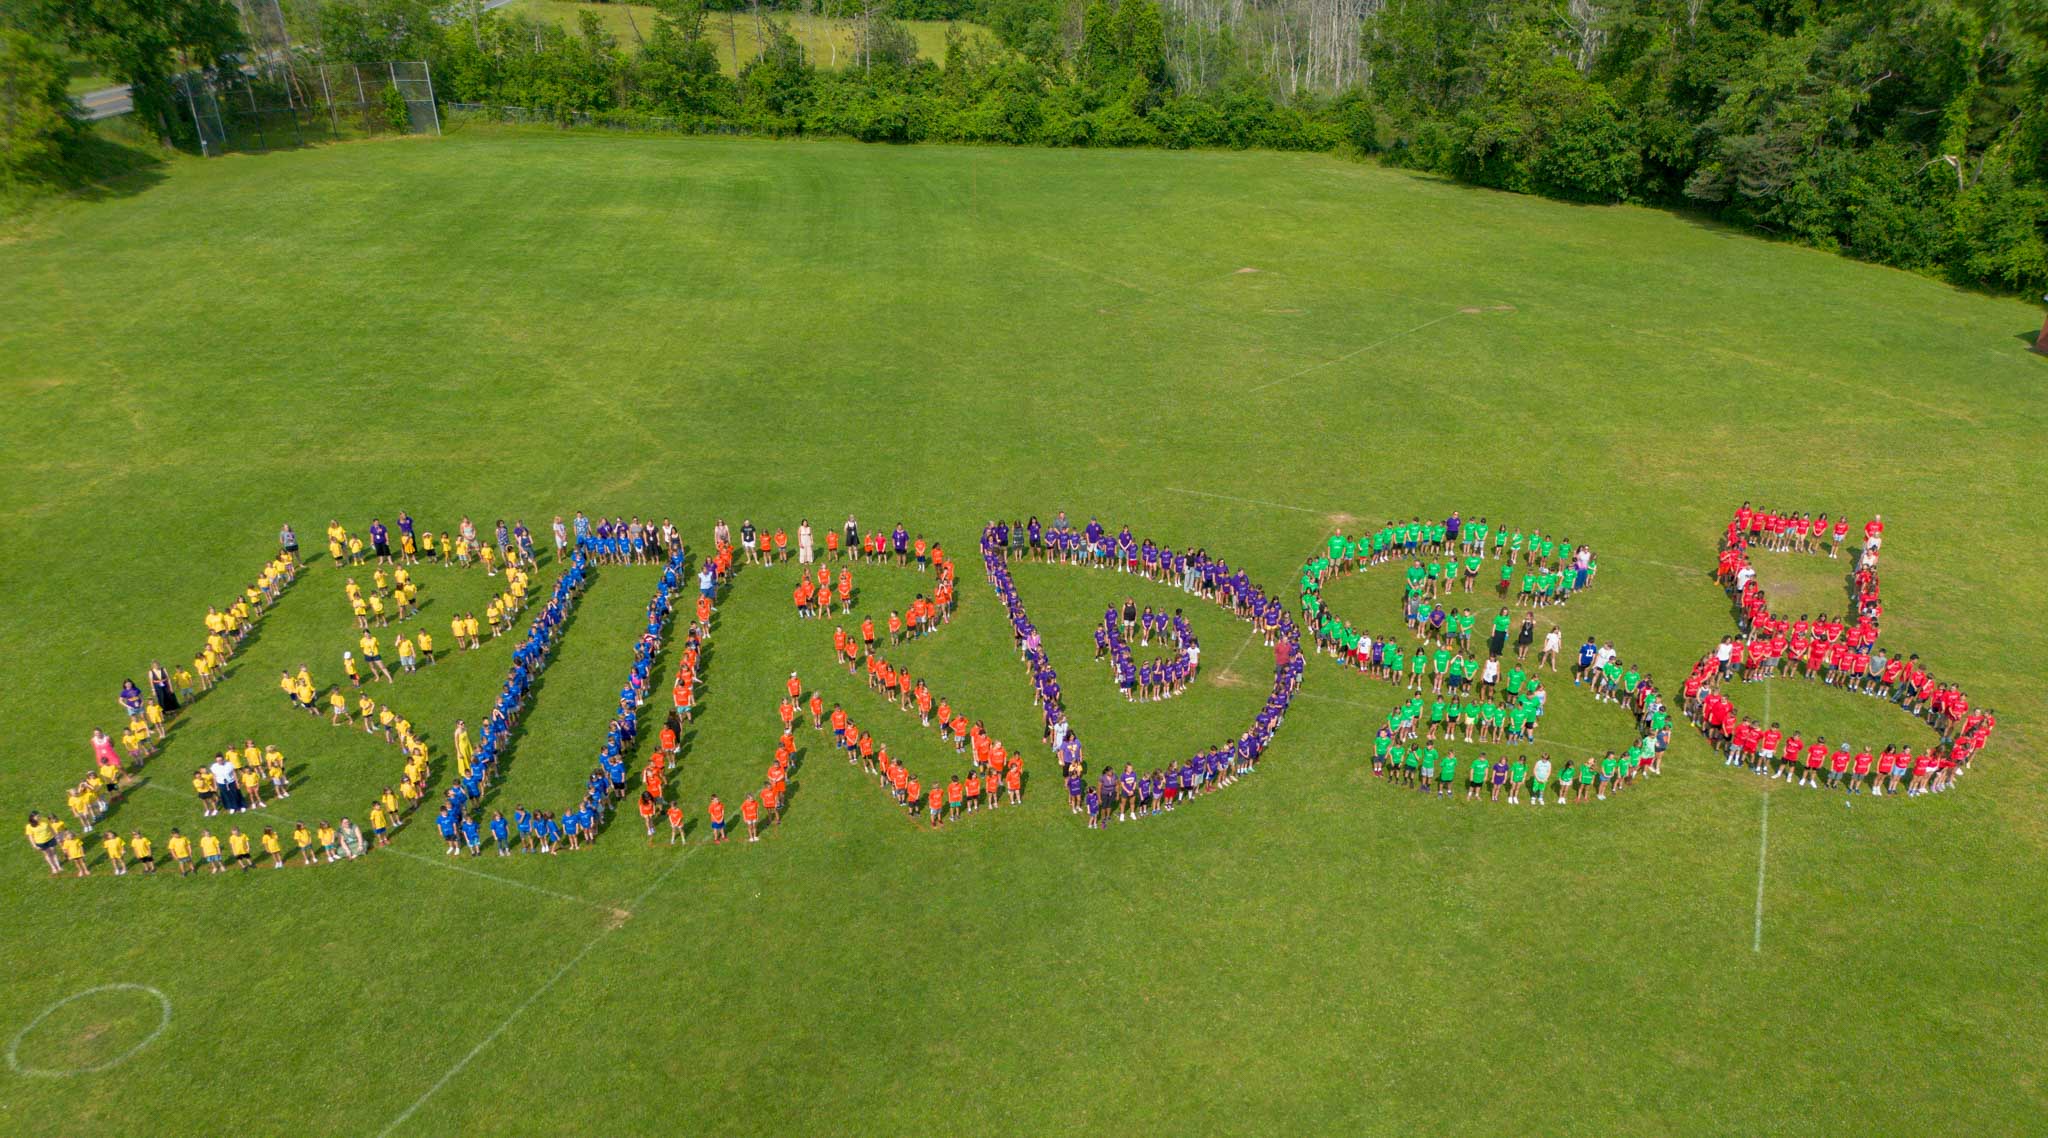 Students standing in the shape of letters for BIRDS ariel photo.